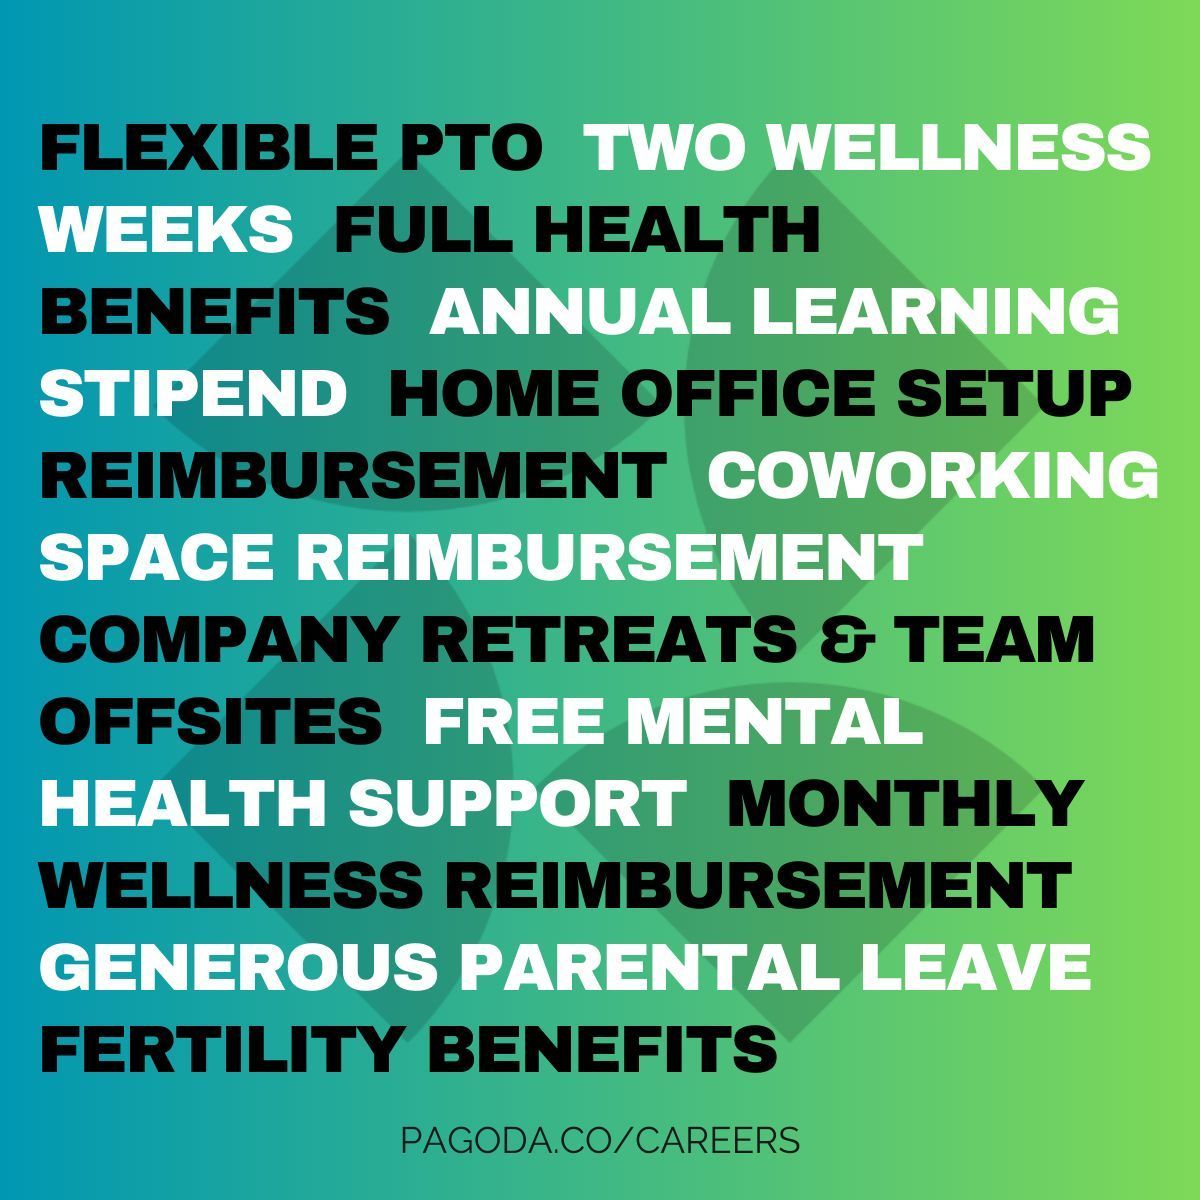 New year, new benefits 💁 We're committed to supporting employee health and well-being, and we're thrilled to announce upgrades to our 2024 benefits package, including a monthly wellness reimbursement and fertility benefits through @CarrotFertility! buff.ly/3TzdJAd